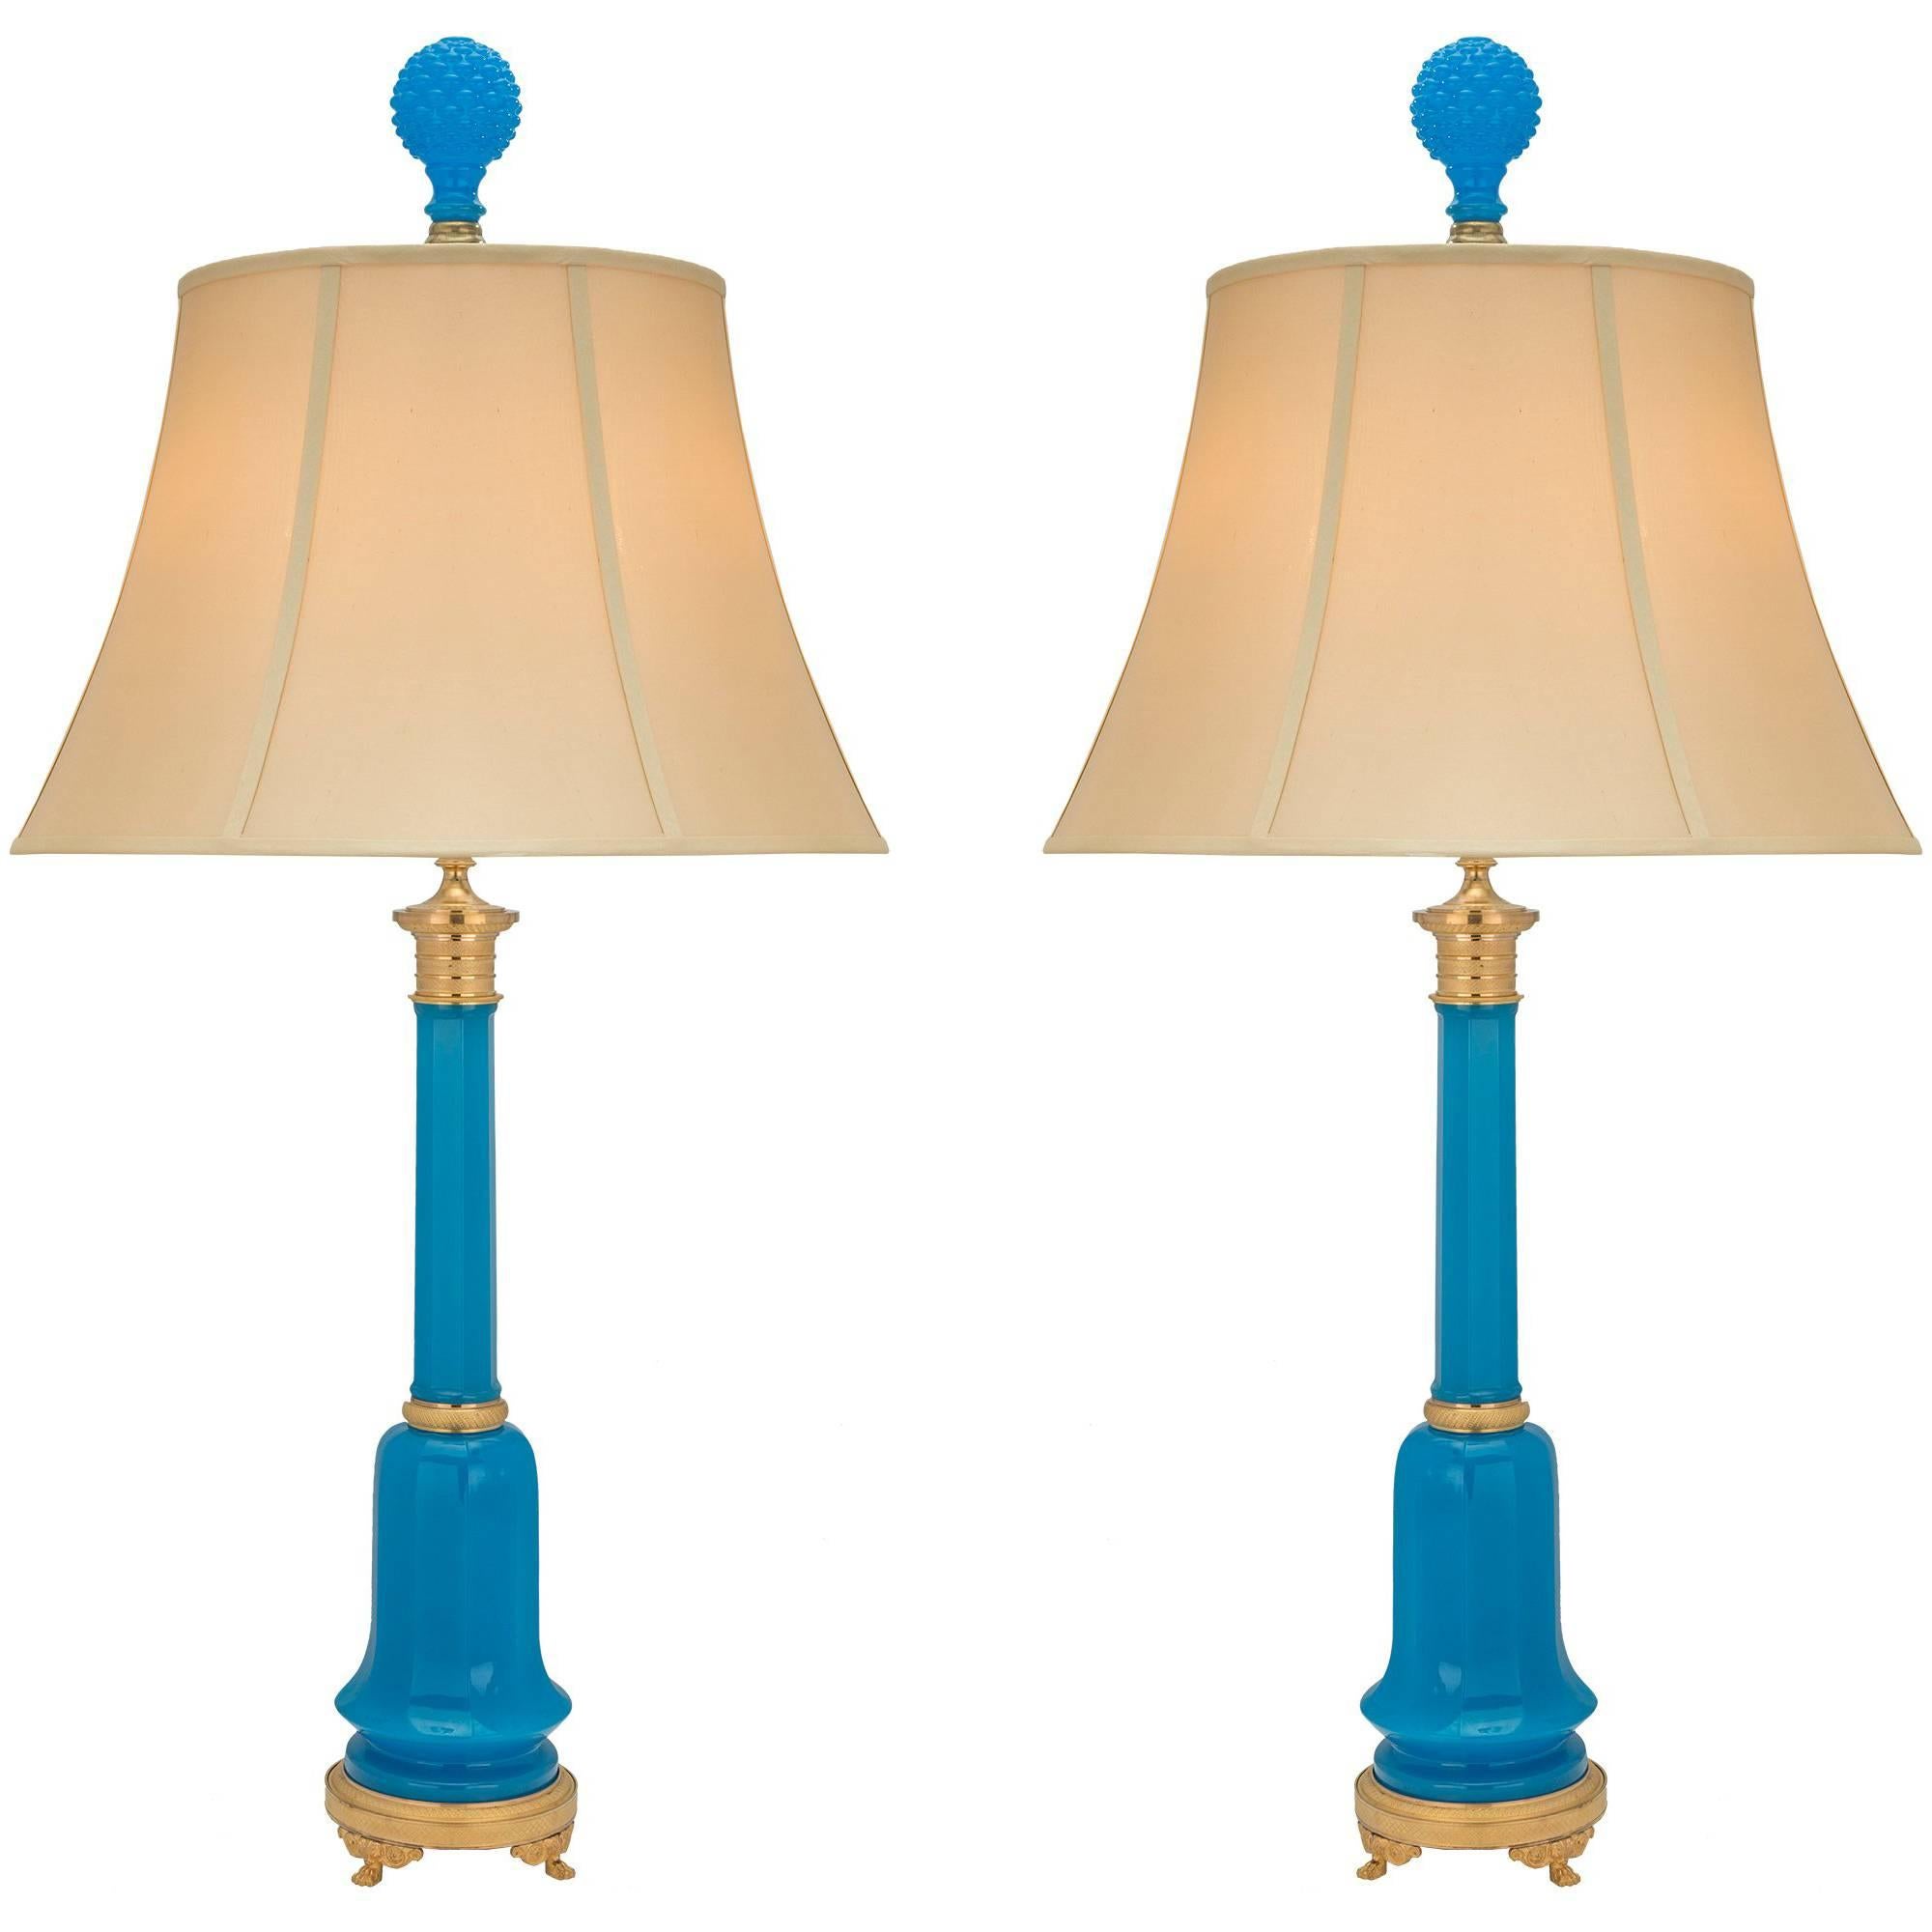 French 19th Century Neoclassical St. Blue Opaline Glass and Ormolu Lamps